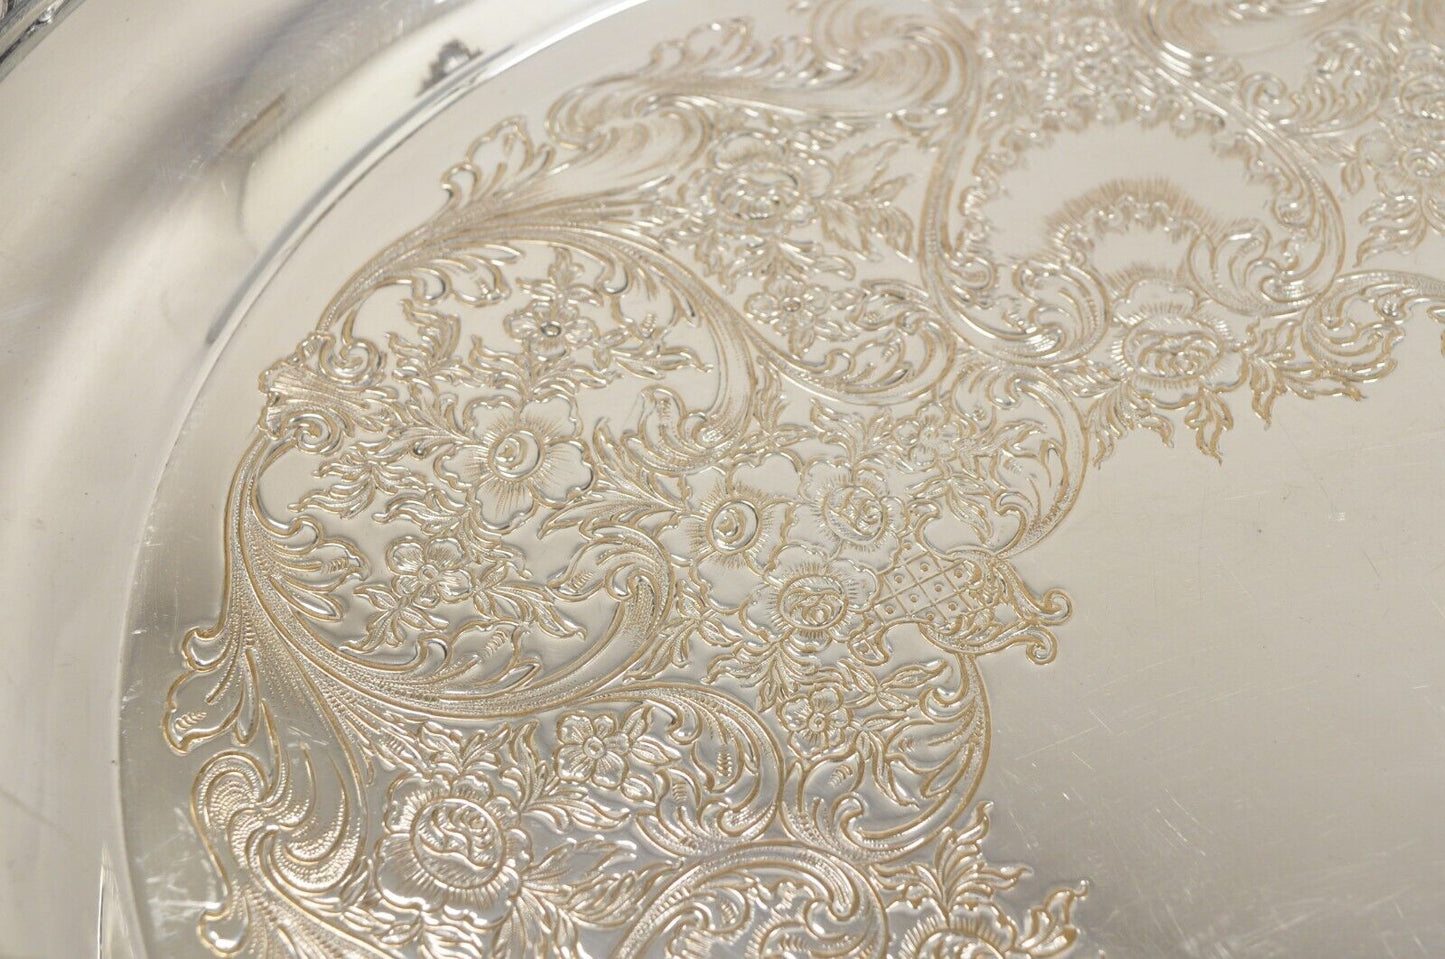 WM Rogers 4082 Silver Plated Victorian Oval Serving Platter Tray